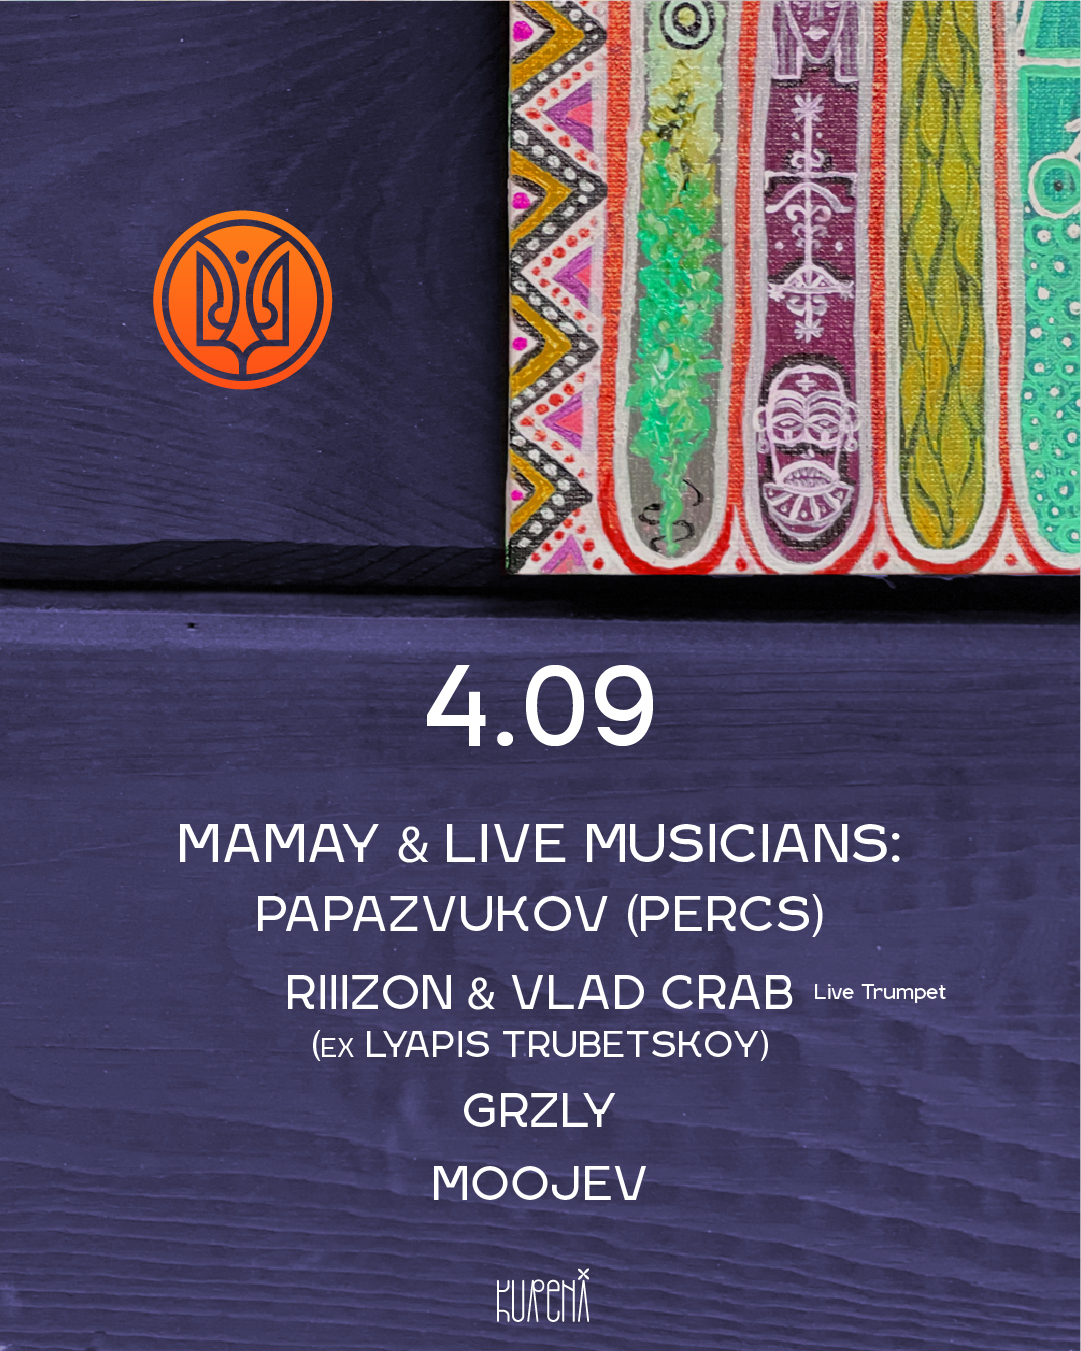 Moojev, Grzly & MAMAY - Flyer front